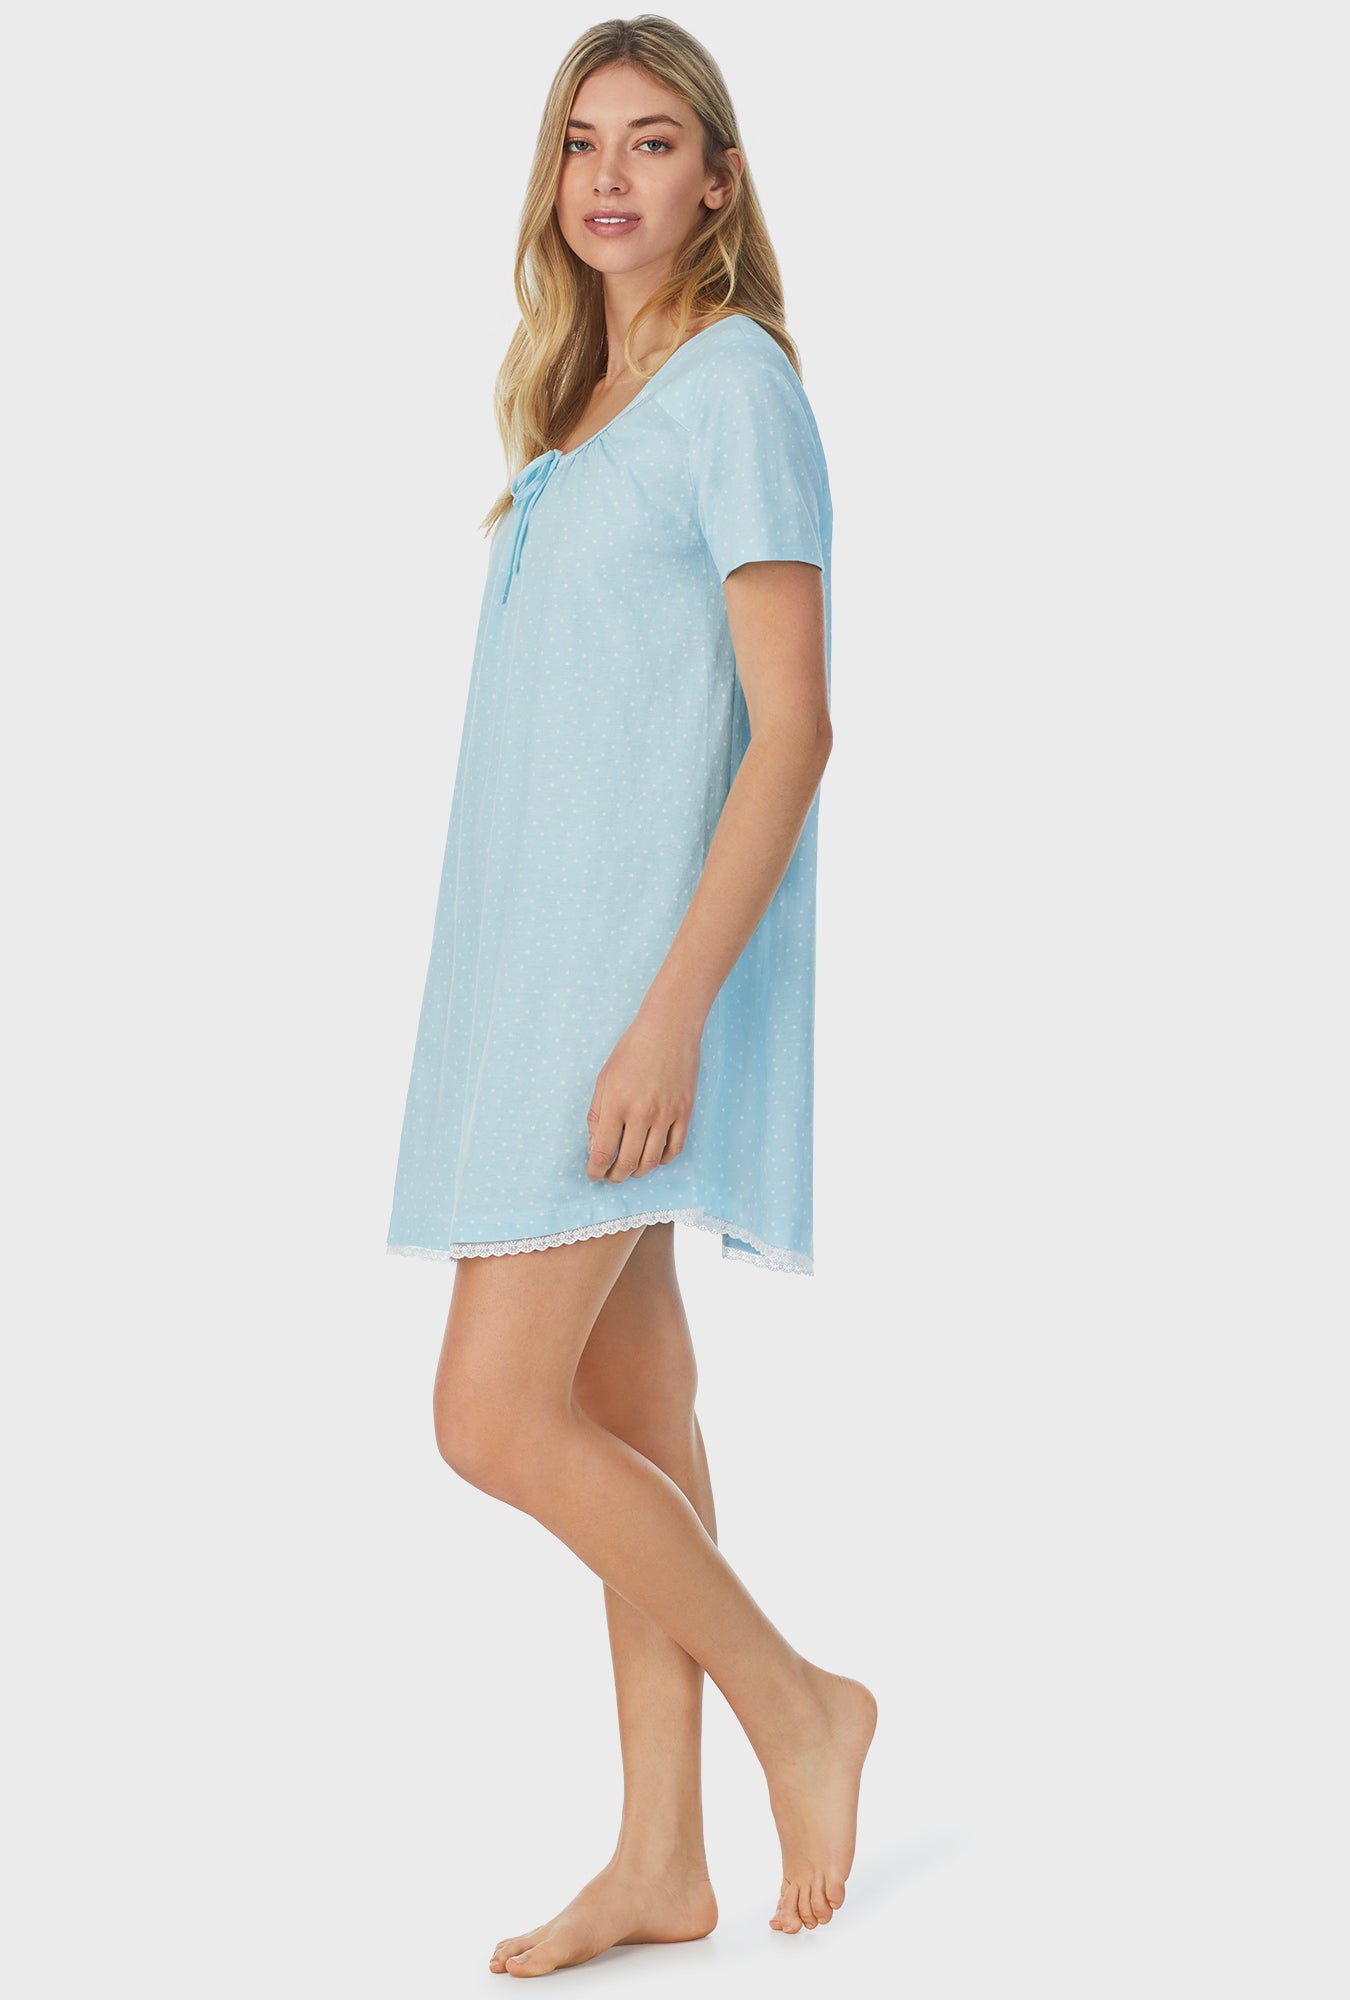 A lady wearing blue short sleeve short nightgown with aqua dots.